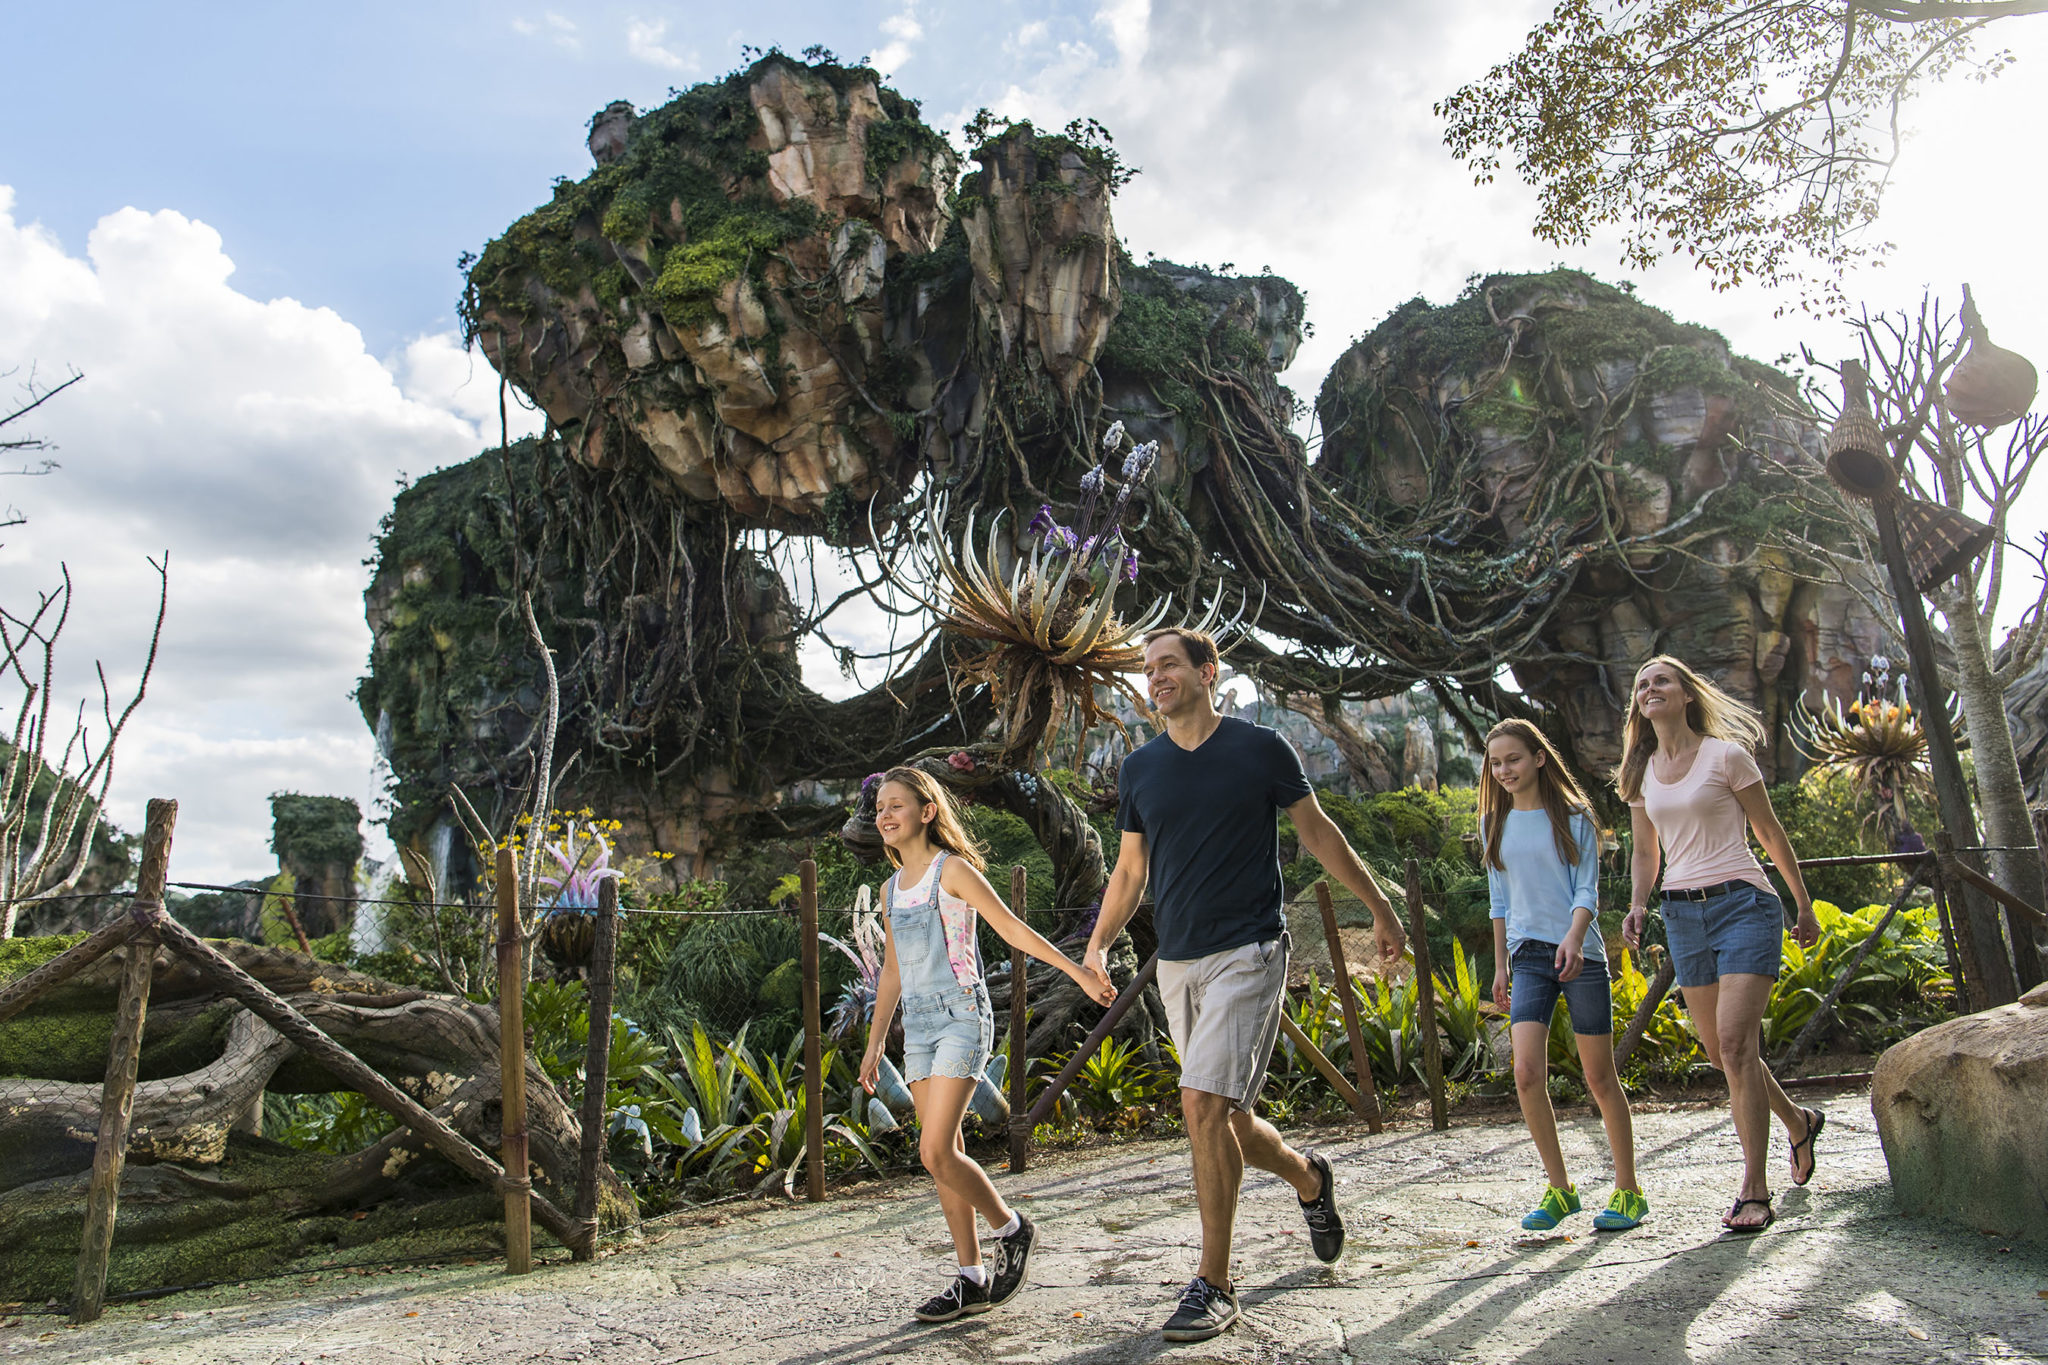 Disney Releases New Job Numbers For Pandora – The World Of Avatar